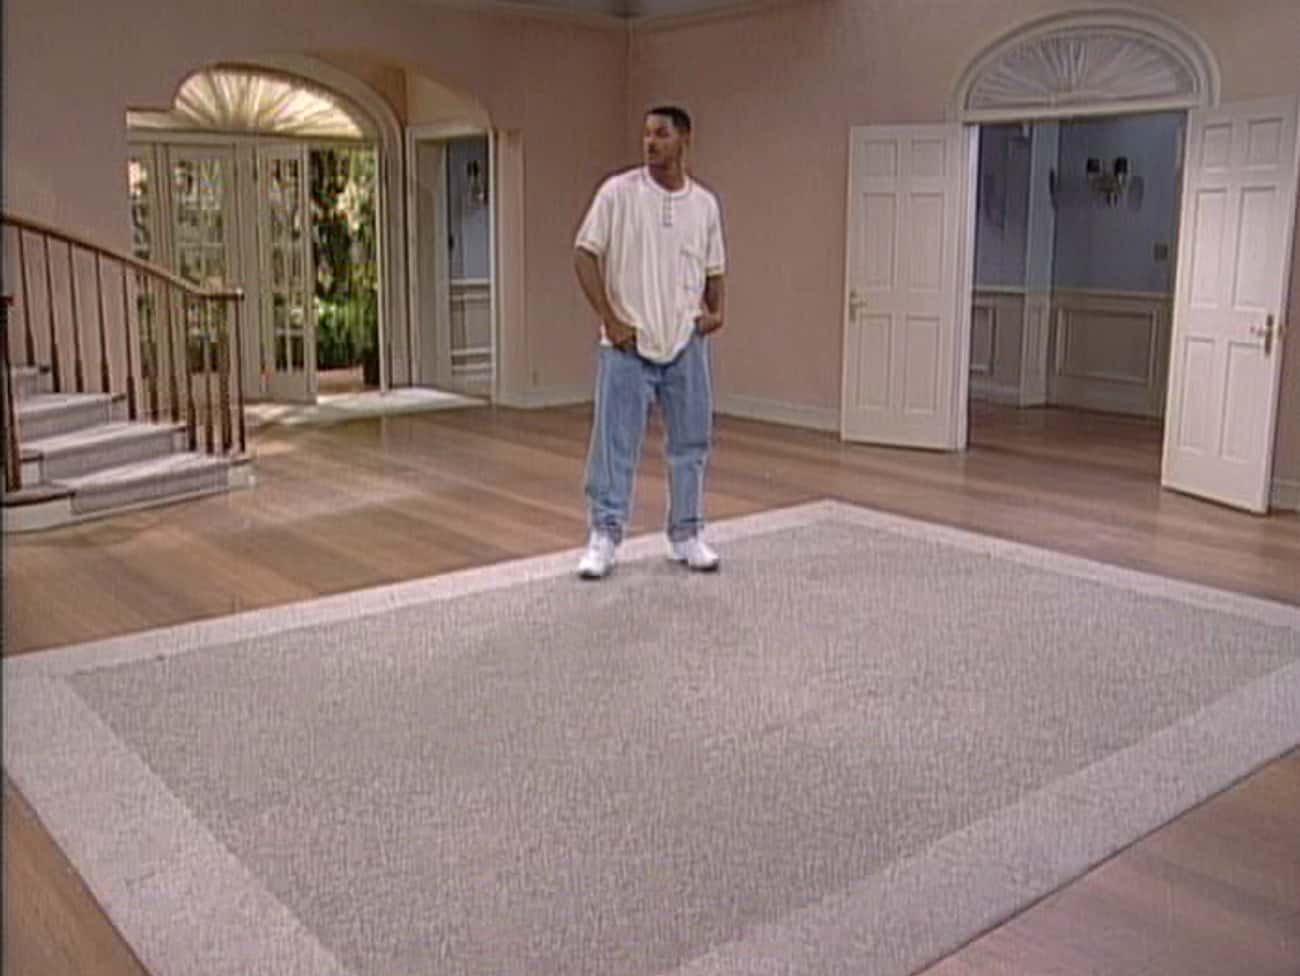 In ‘Fresh Prince,’ Will Looks Over The Empty House And Turns Off The Light (On Carlton)